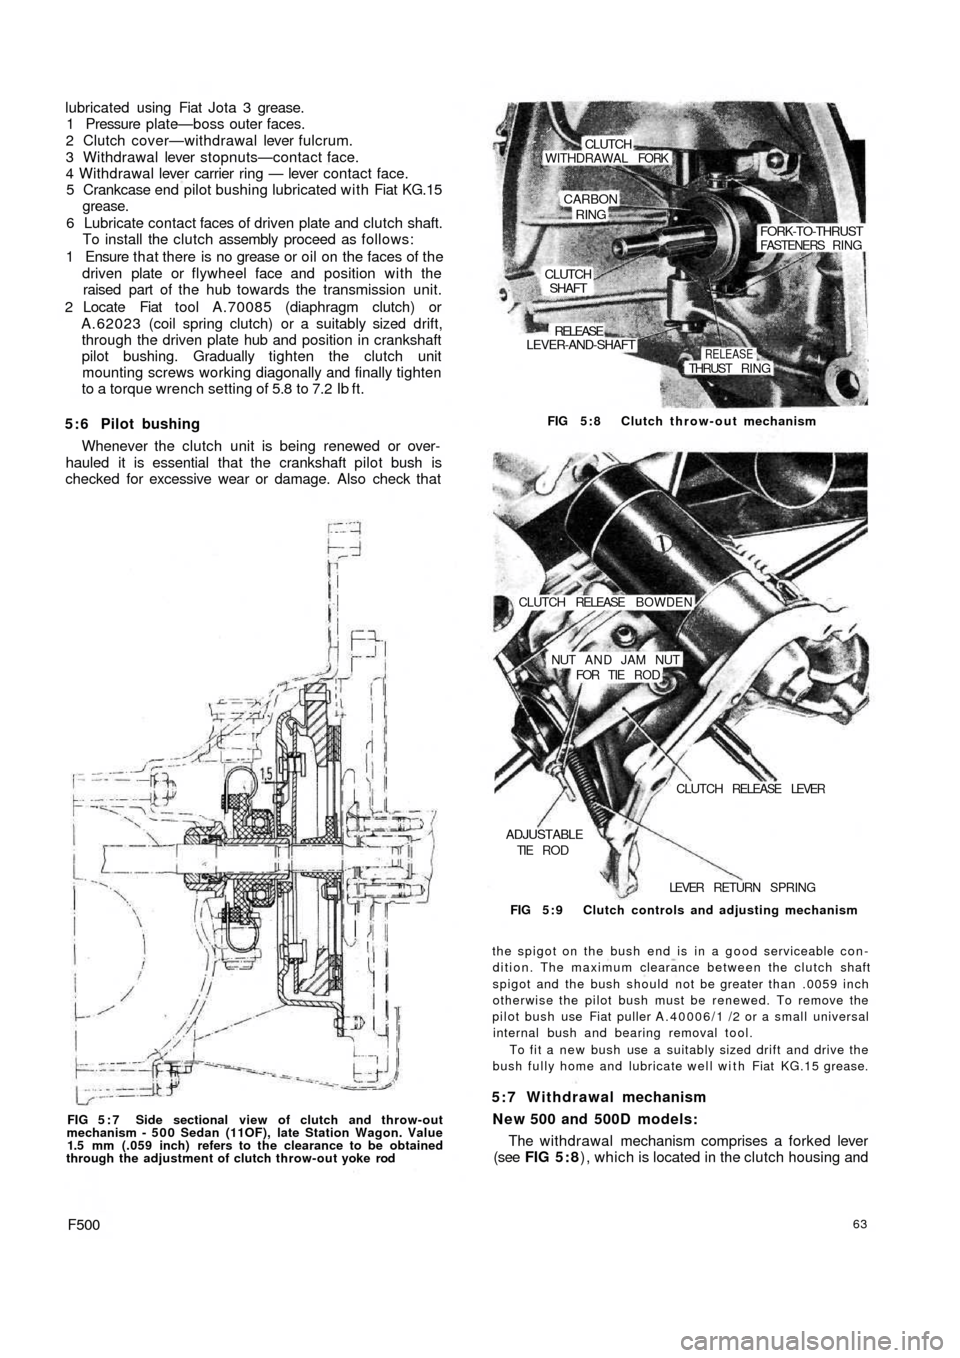 FIAT 500 1970 1.G Workshop Manual lubricated using Fiat Jota 3 grease.
1 Pressure plate—boss outer faces.
2 Clutch cover—withdrawal lever fulcrum.
3 Withdrawal lever stopnuts—contact face.
4 Withdrawal lever carrier ring — lev